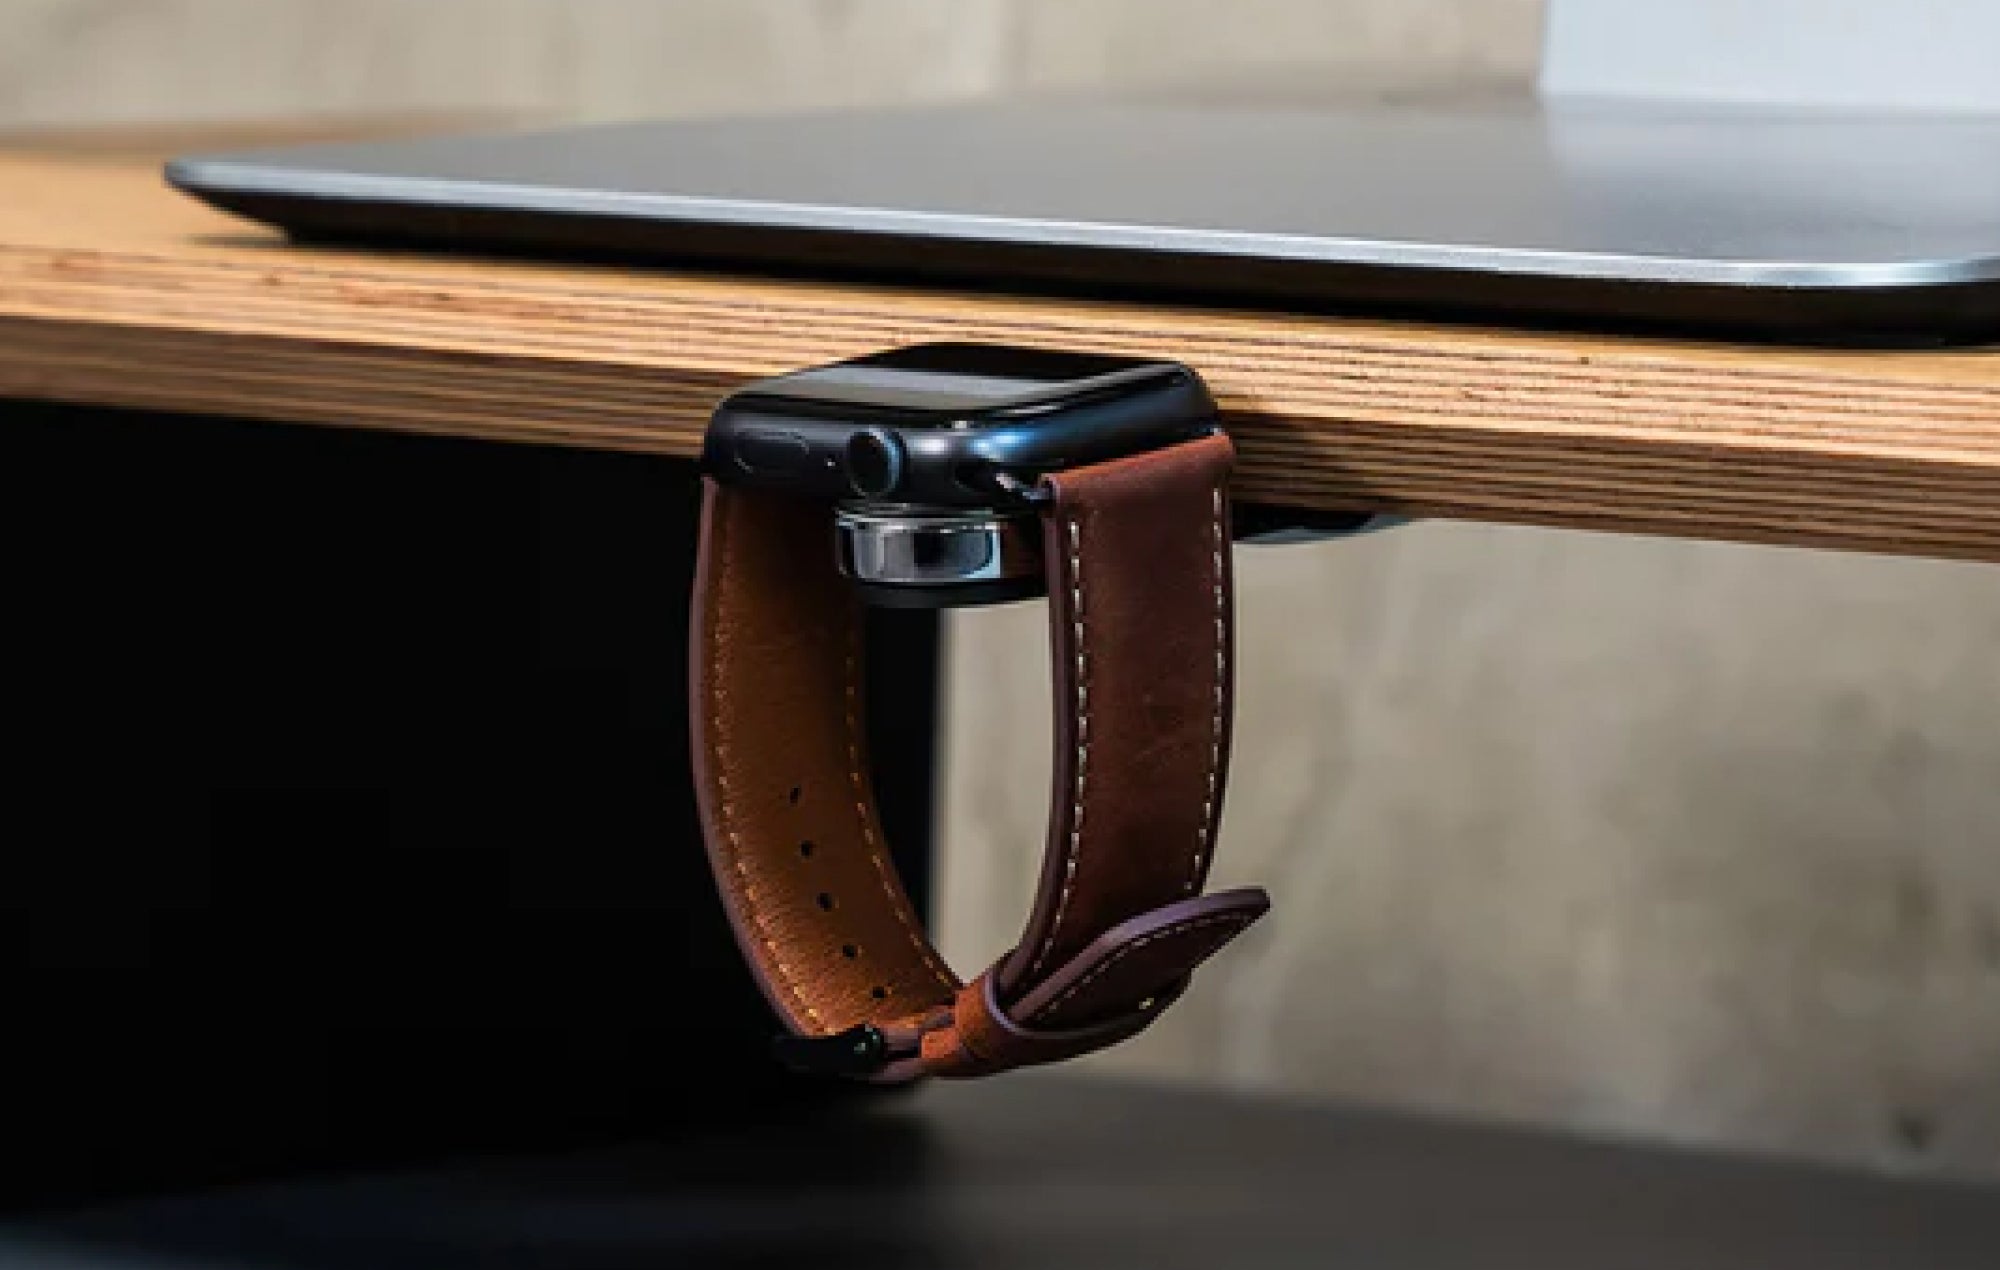 From the wrist to the Setup Cockpit: The new Apple Watch Holder